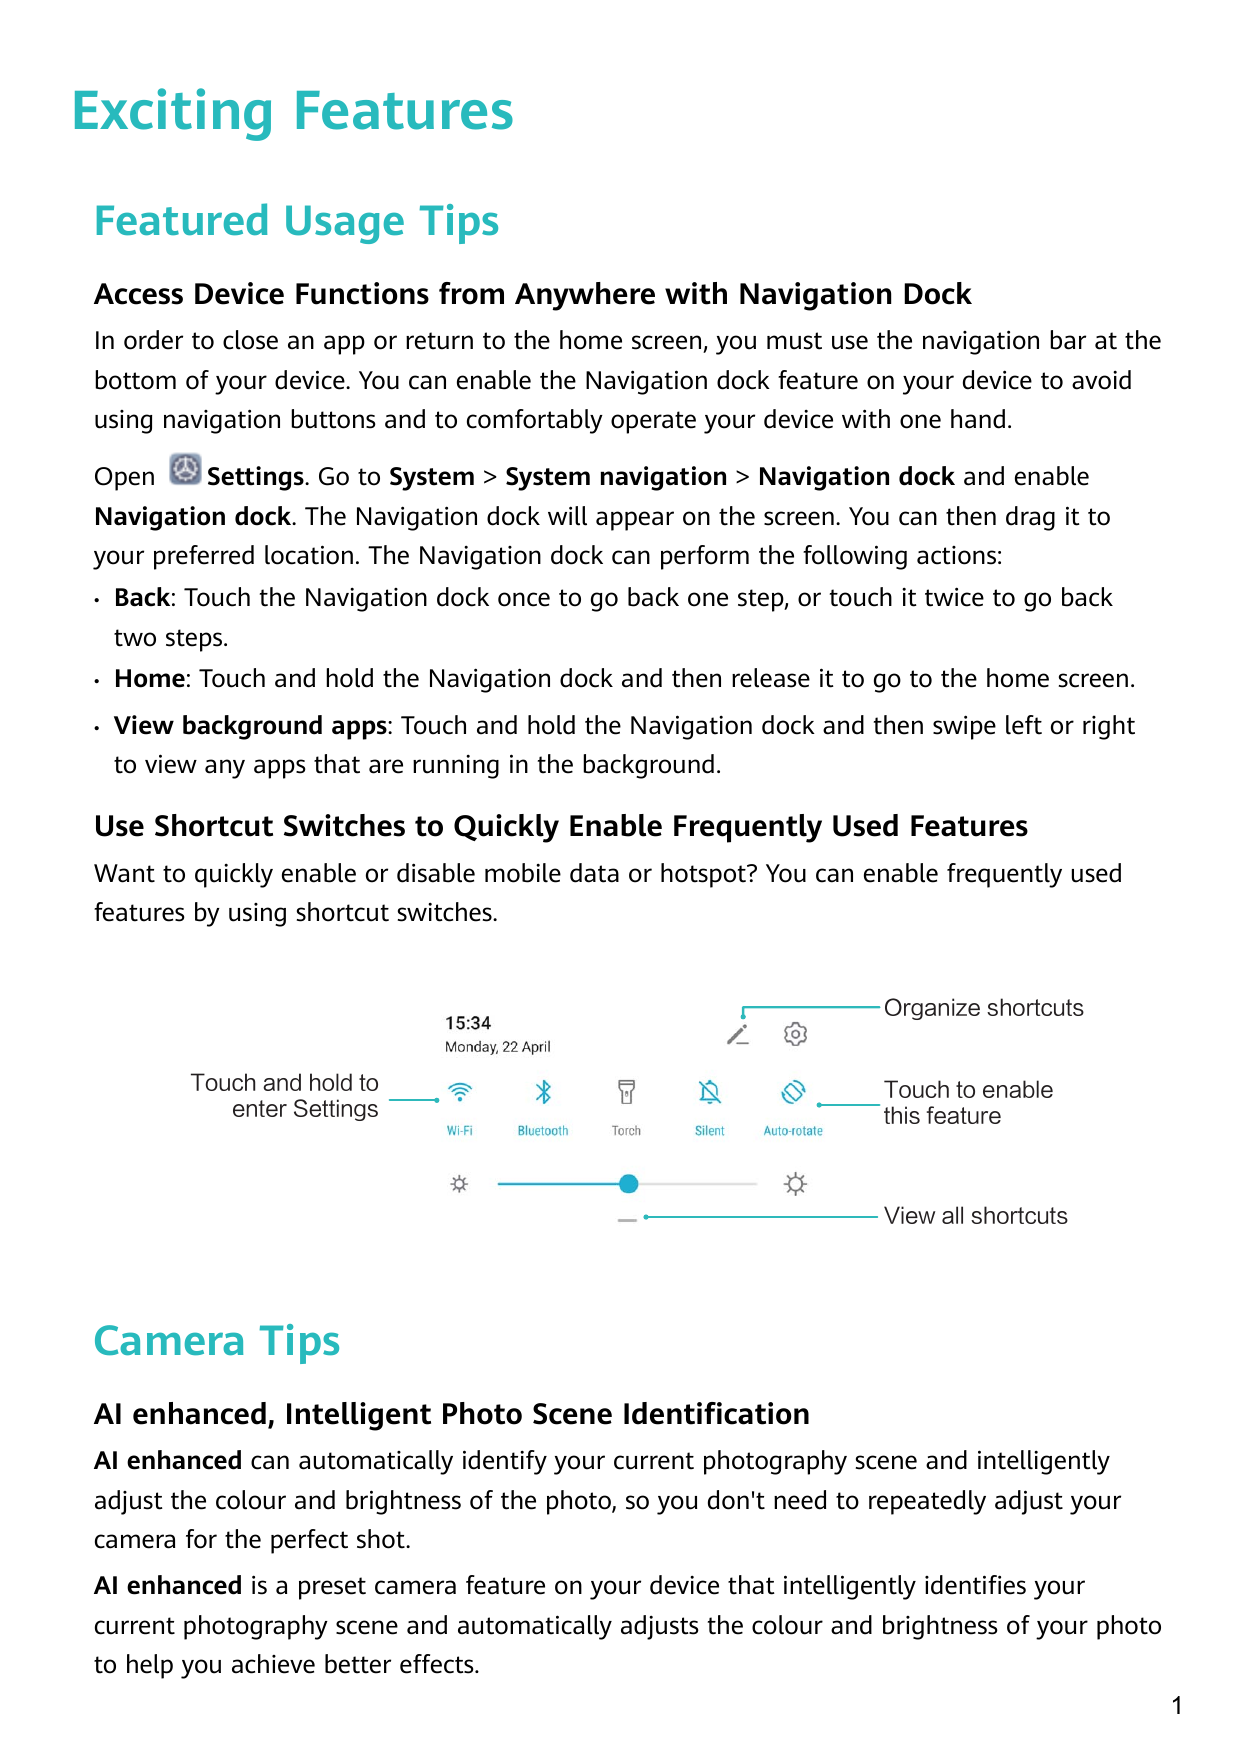 Exciting FeaturesFeatured Usage TipsAccess Device Functions from Anywhere with Navigation DockIn order to close an app or return